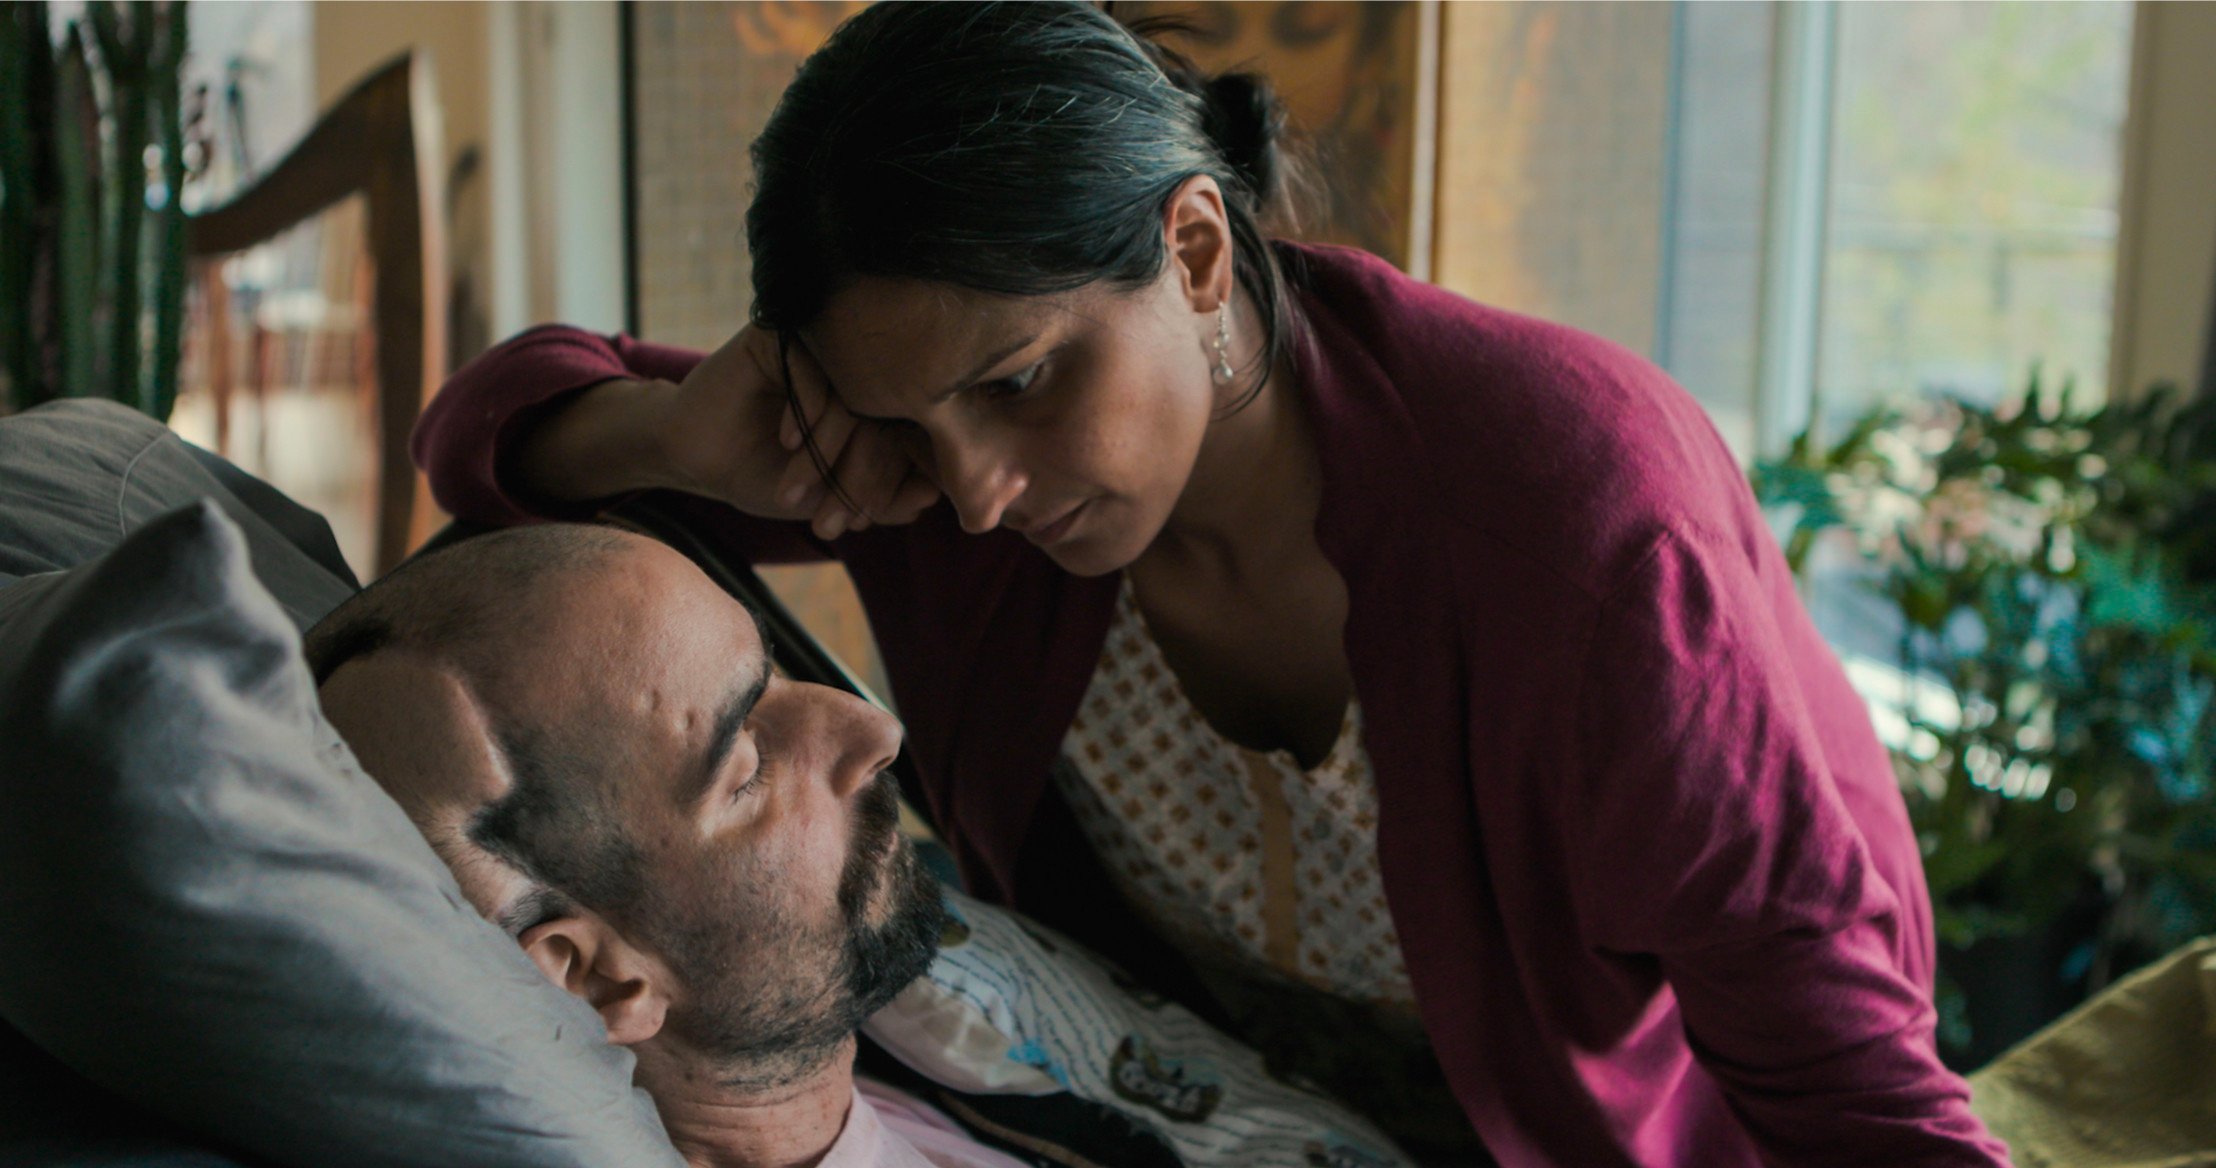 Brain cancer sufferer Ethan Sisser (left) with Dr Aditi Sethi, a hospice physician and end-of-life doula, in a still from “The Last Ecstatic Days”. Sisser carefully planned his end-of-life care in his determination to be positive and present to the end.